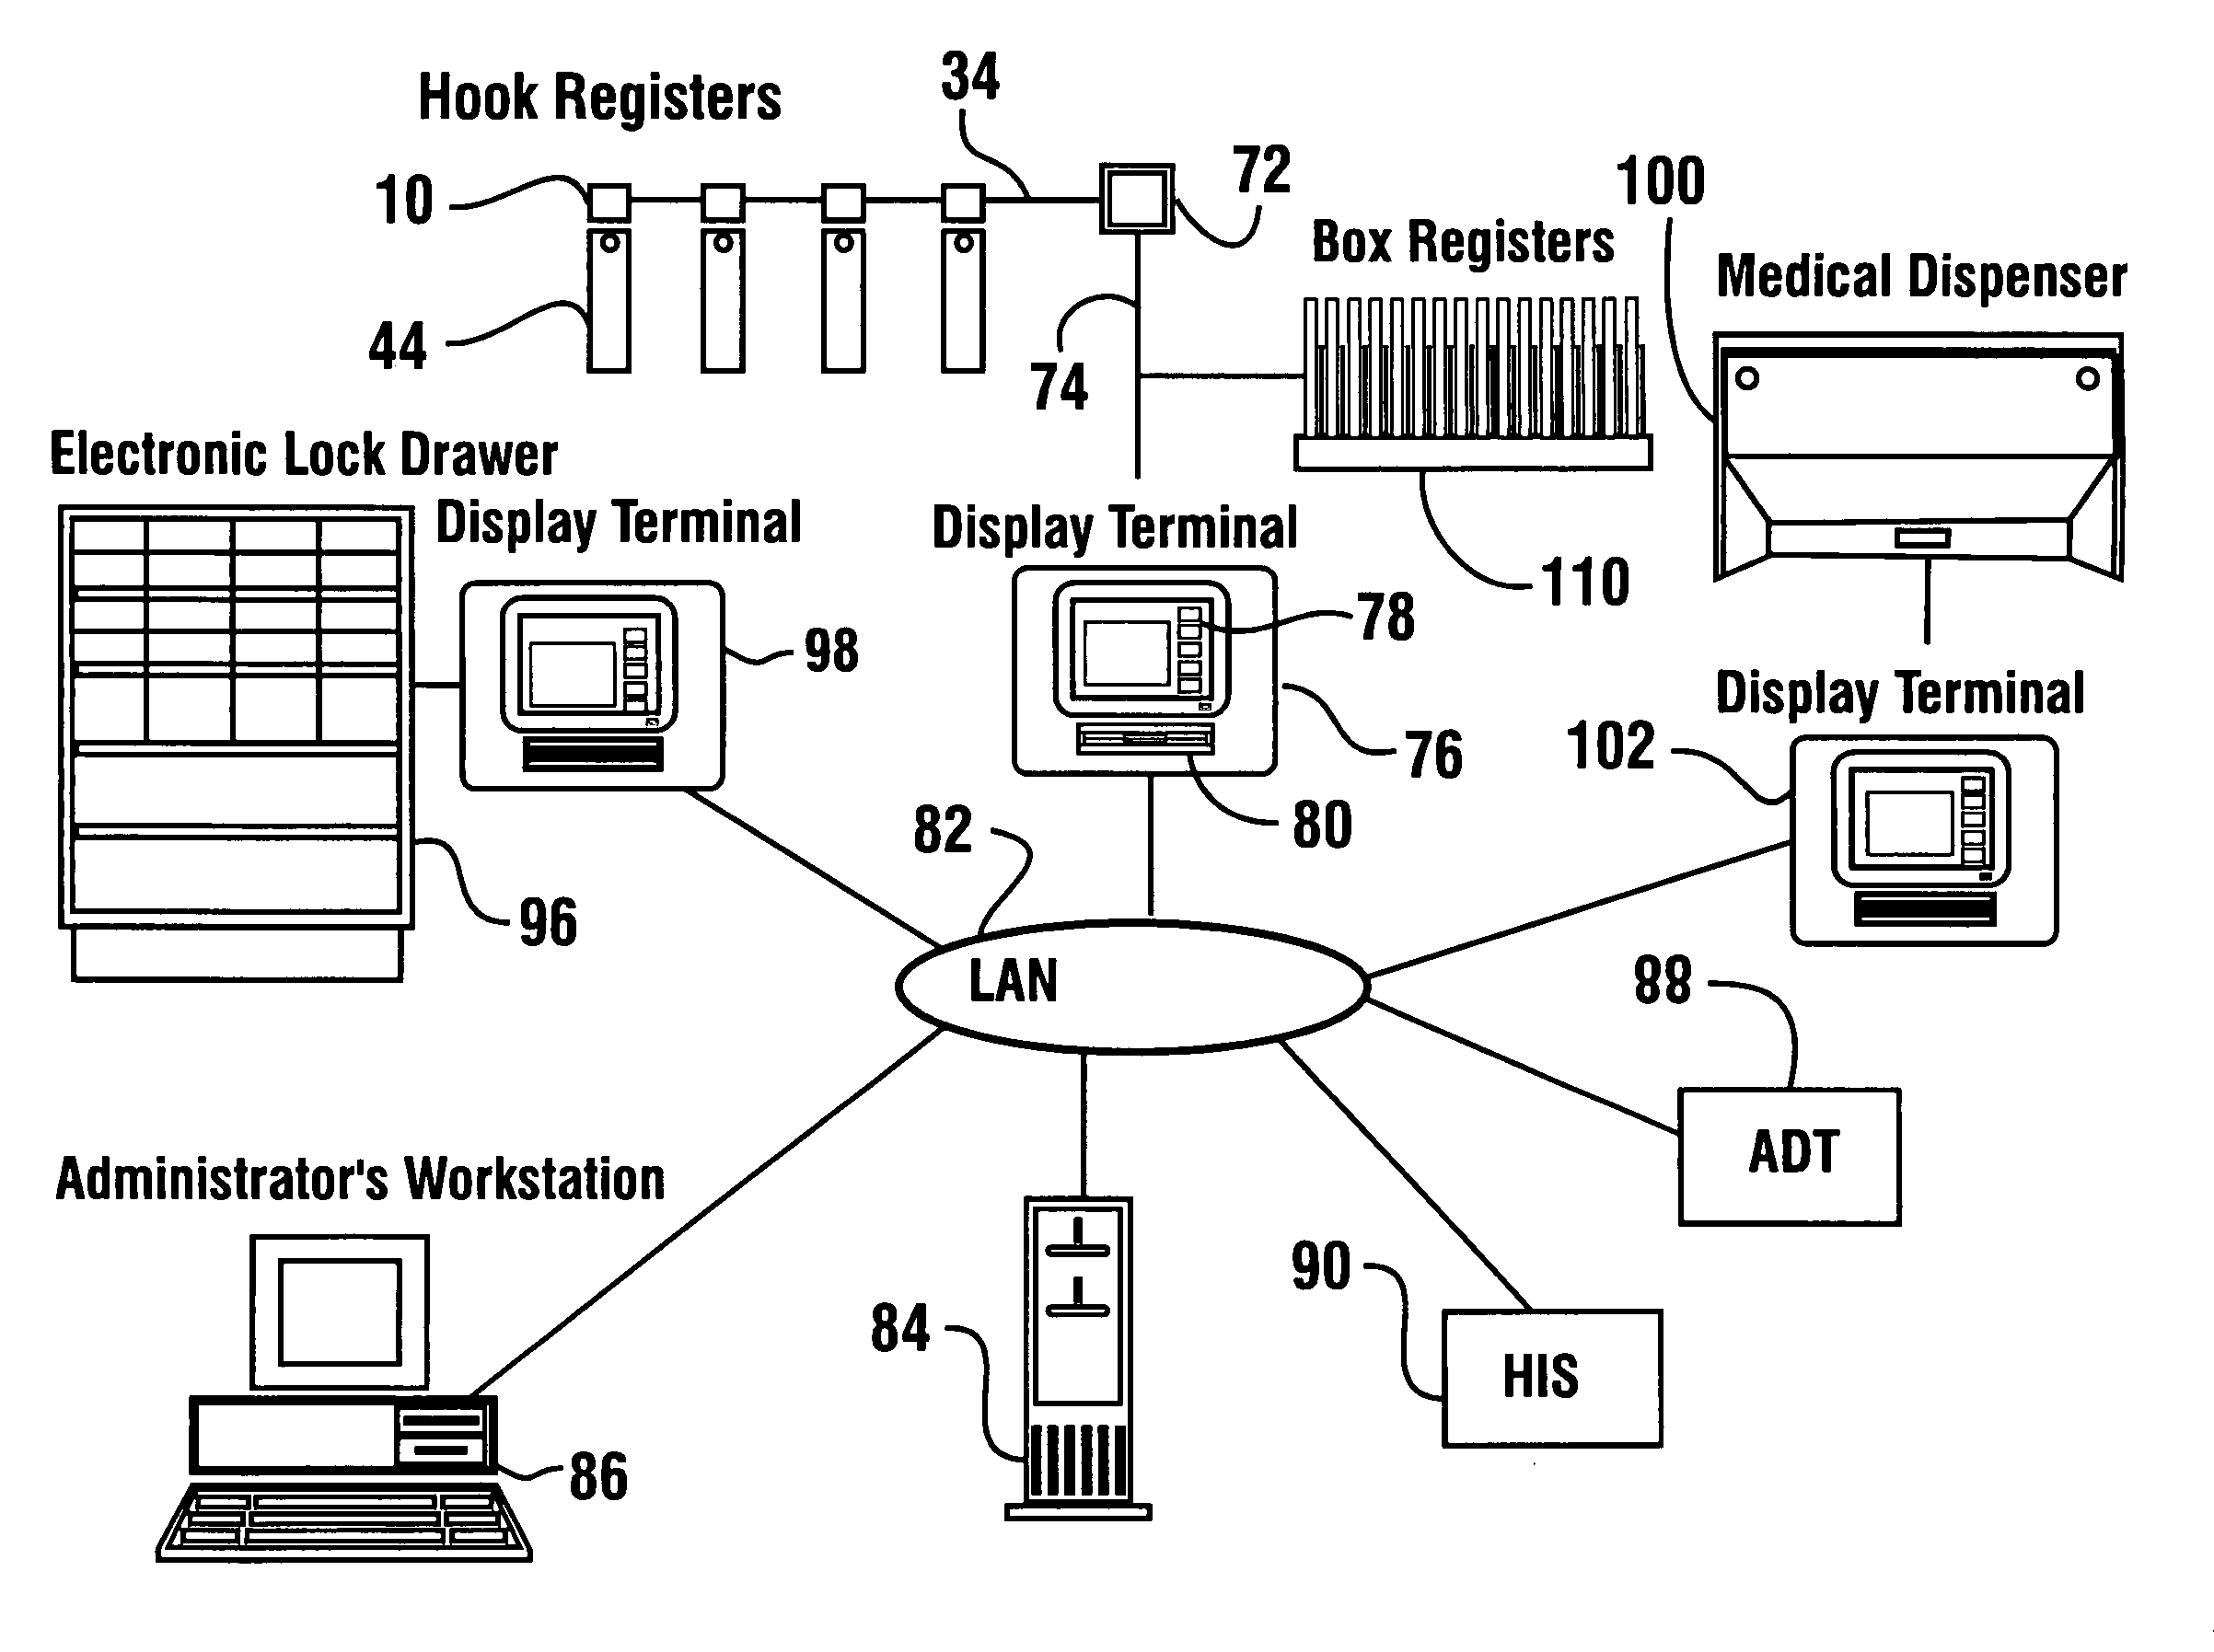 Method of dispensing and tracking the giving of medical items to patients